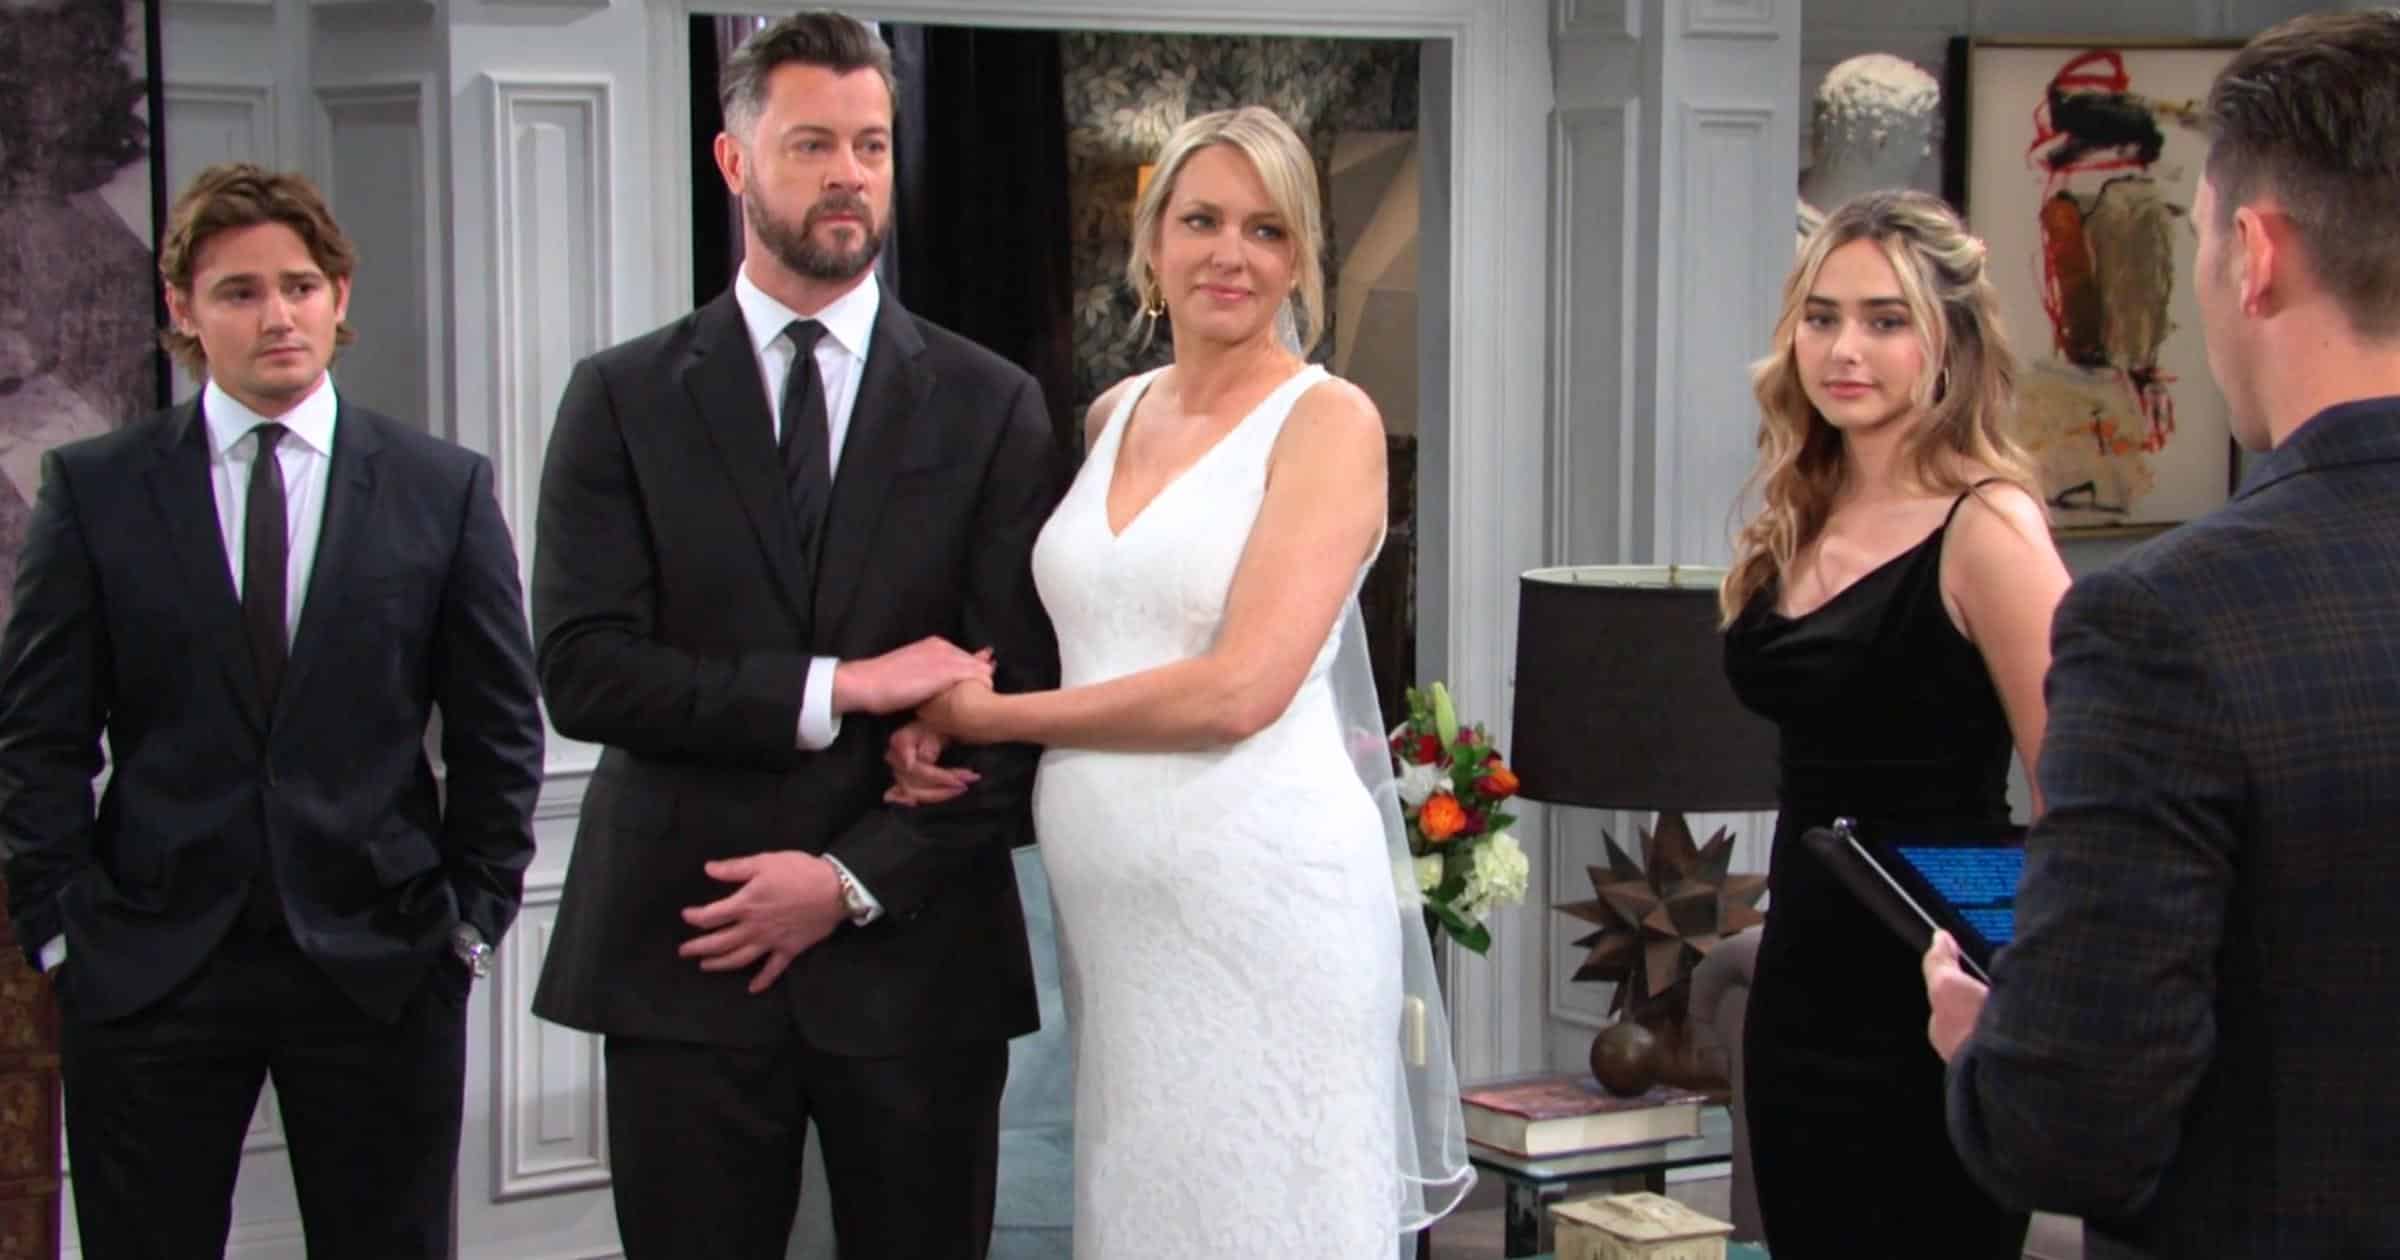 Days of Our Lives - Nov 2 - Johnny EJ Nicole Holly and Chad